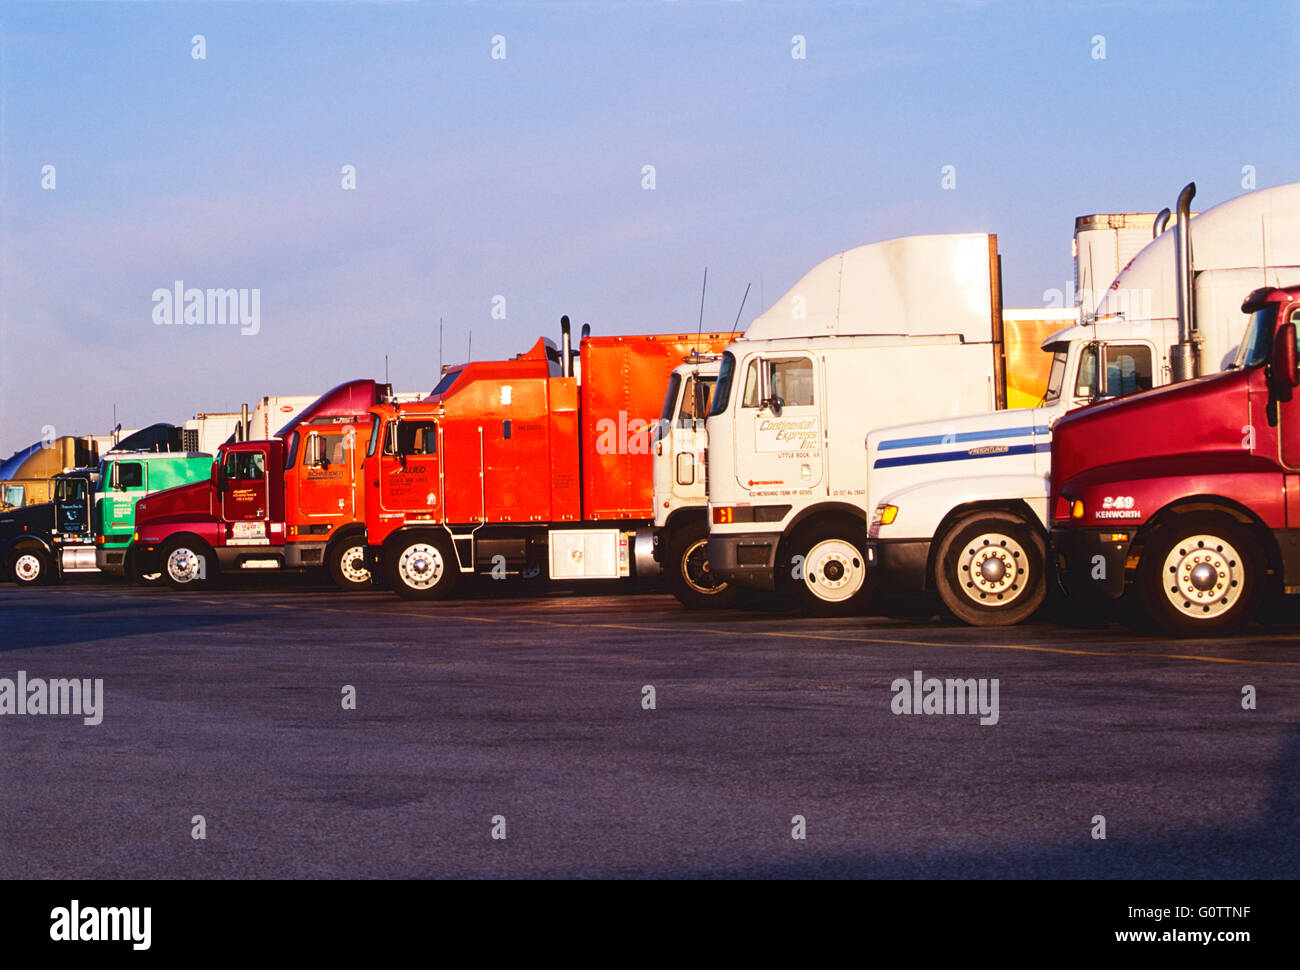 Parked tractor trailer trucks lined up at truck stop rest area Stock Photo